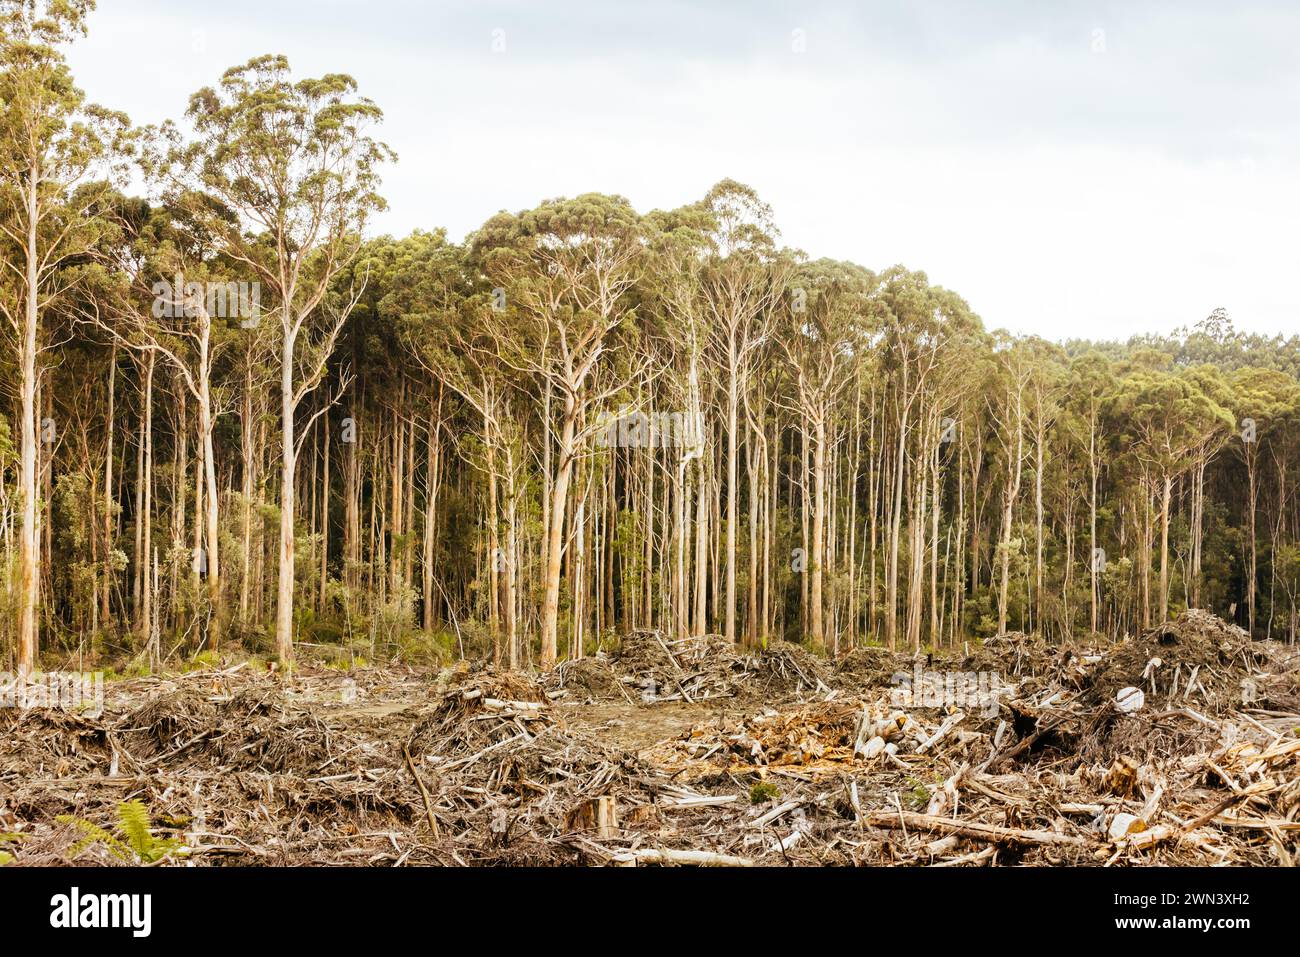 DOVER, AUSTRALIA - FEBRUARY 23: Forestry Tasmania continues logging of Southwest National Park near Dover, a World Heritage Area. This area contans ol Stock Photo